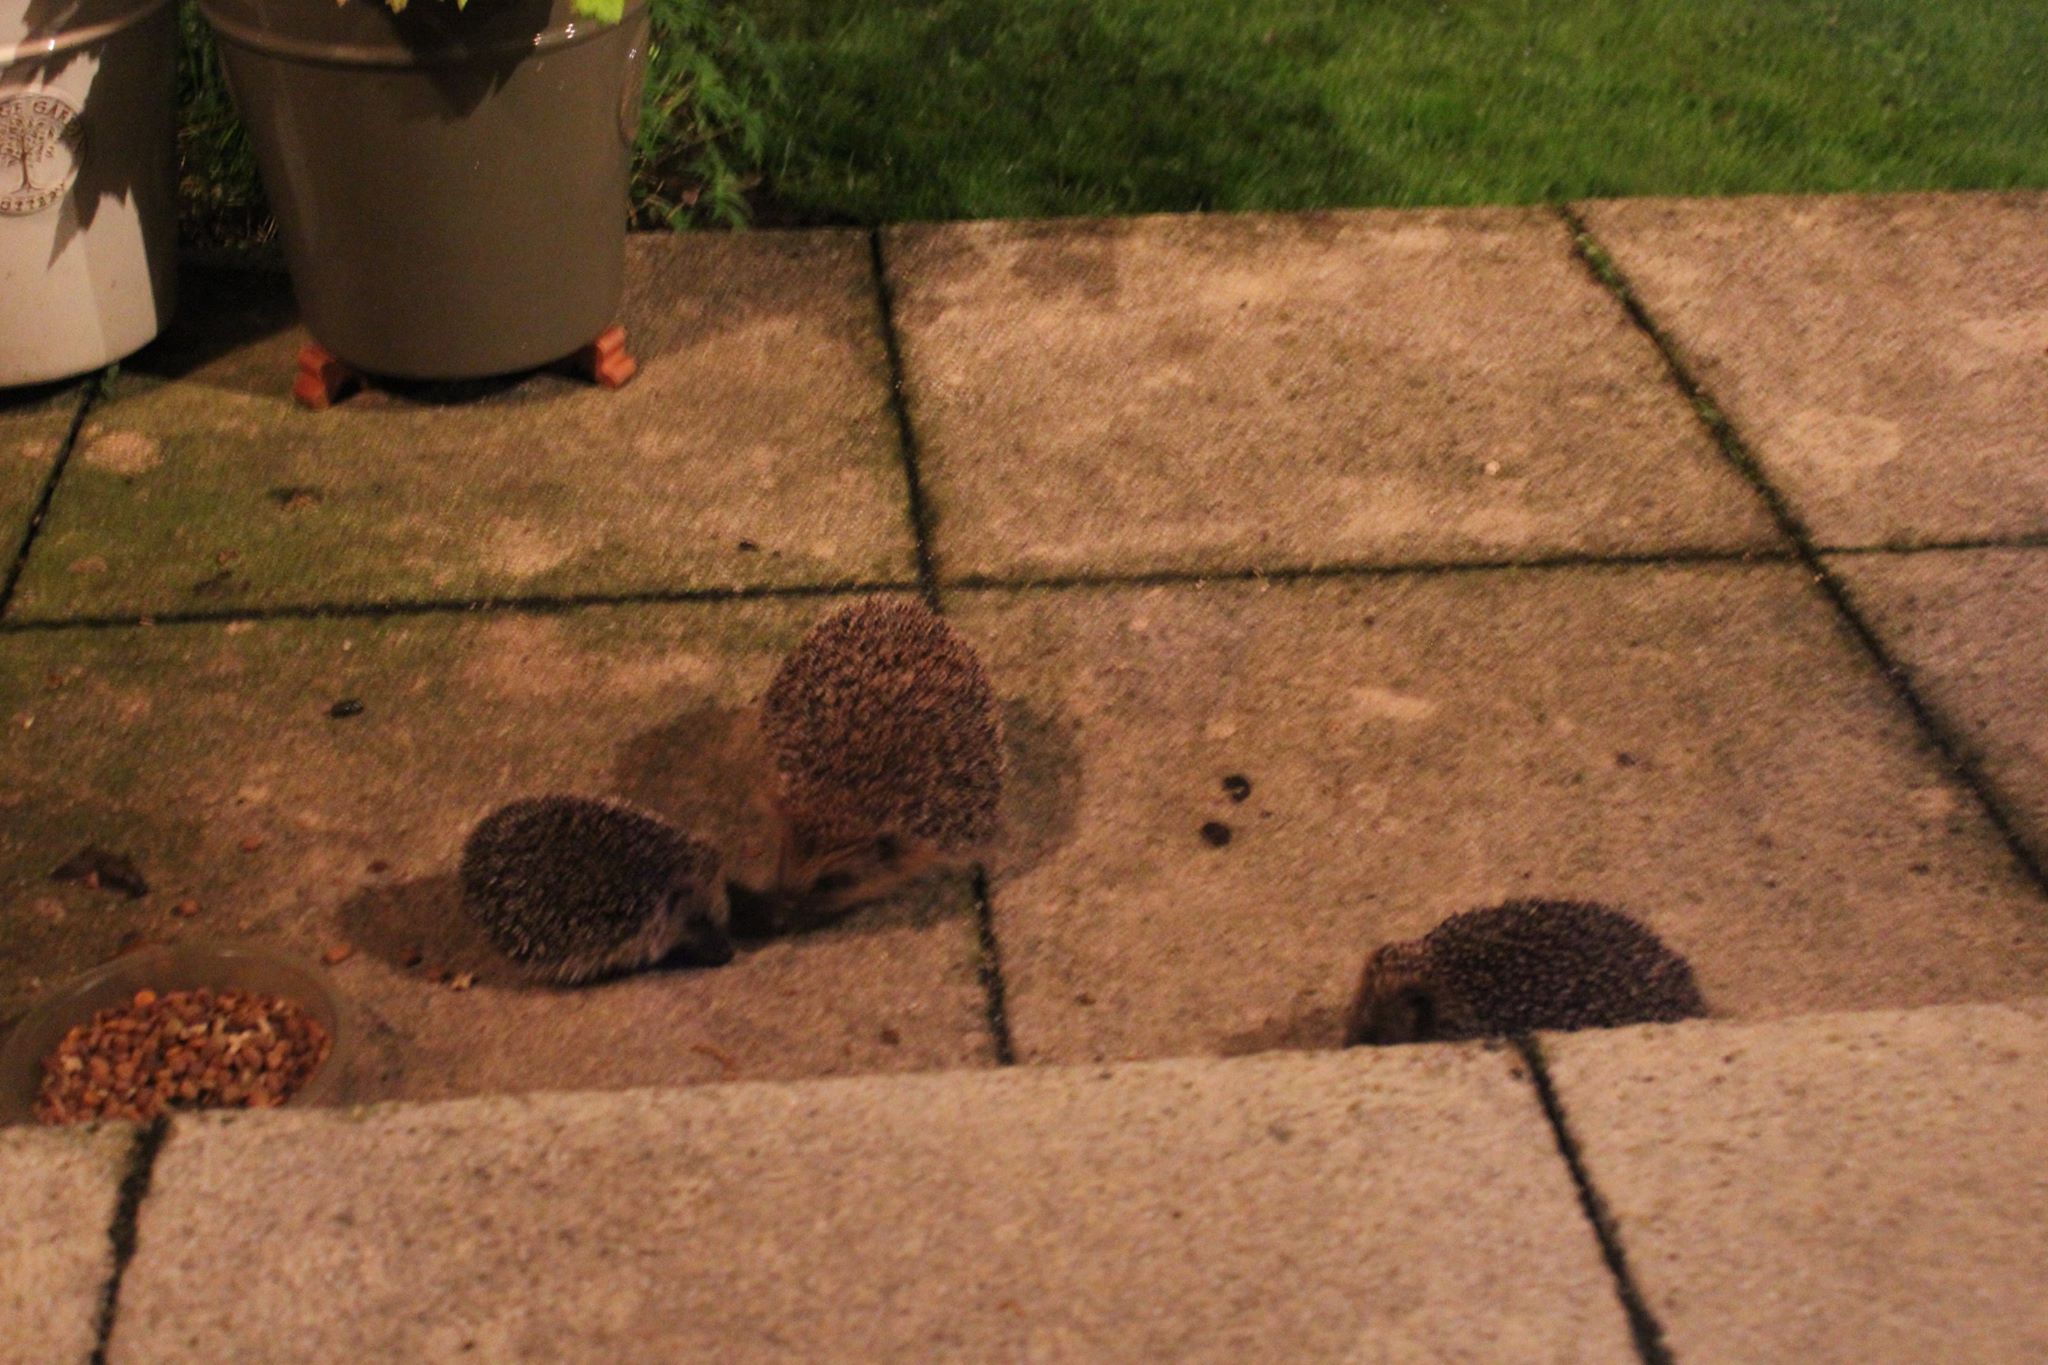 Mum and baby hedgehog on patio small